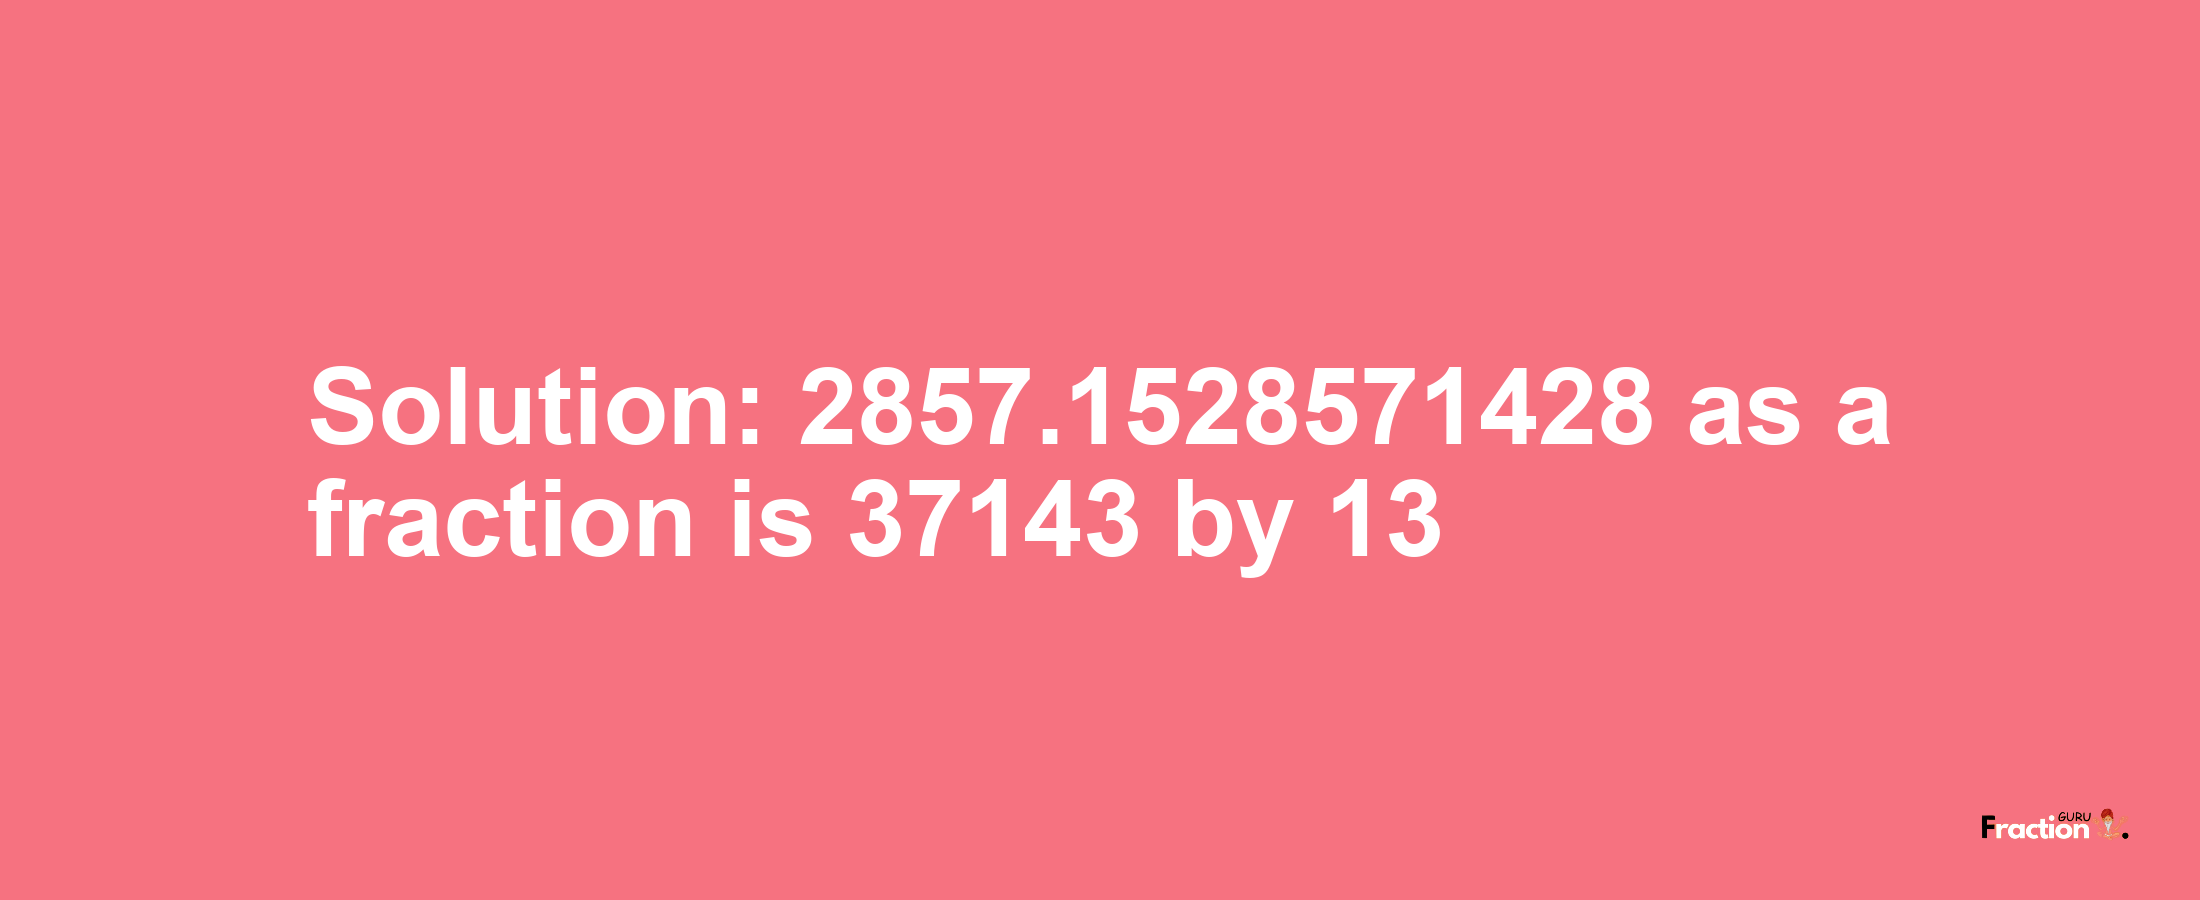 Solution:2857.1528571428 as a fraction is 37143/13